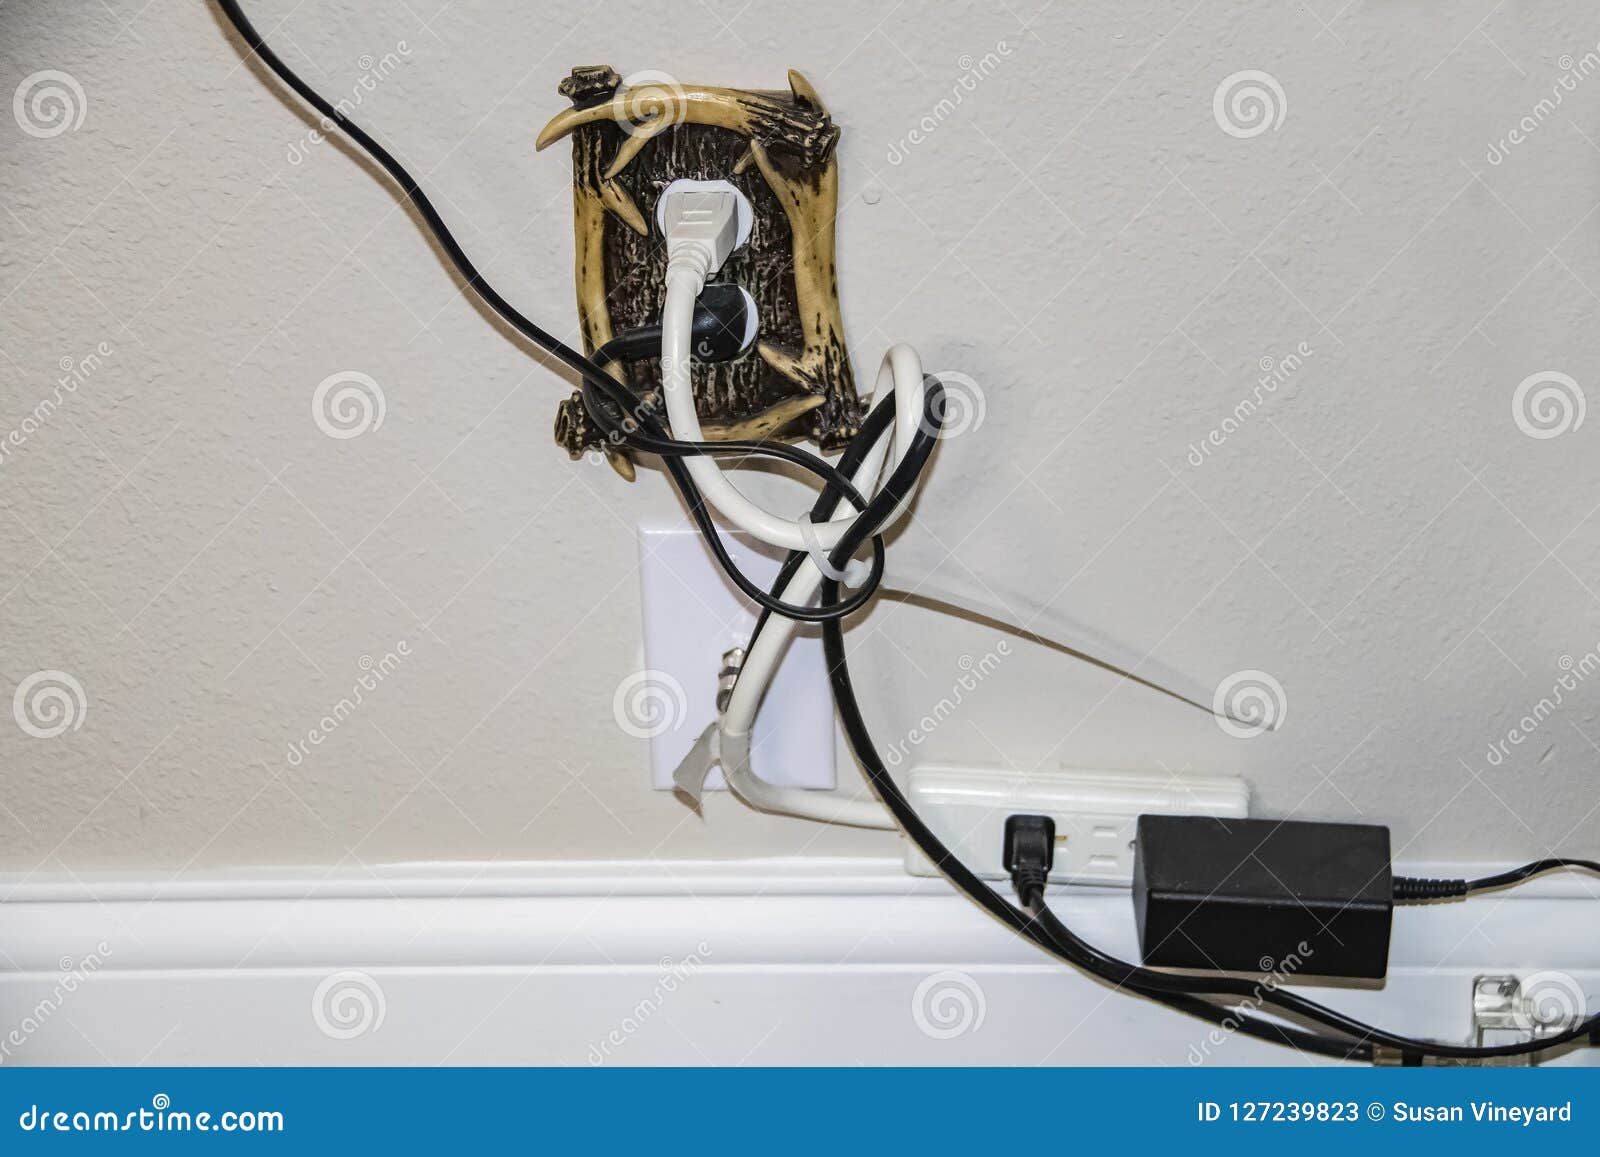 messy-electric-cords-too-many-plugged-one-decorative-electrical-outlet-plus-cable-all-tangle-127239823.jpg